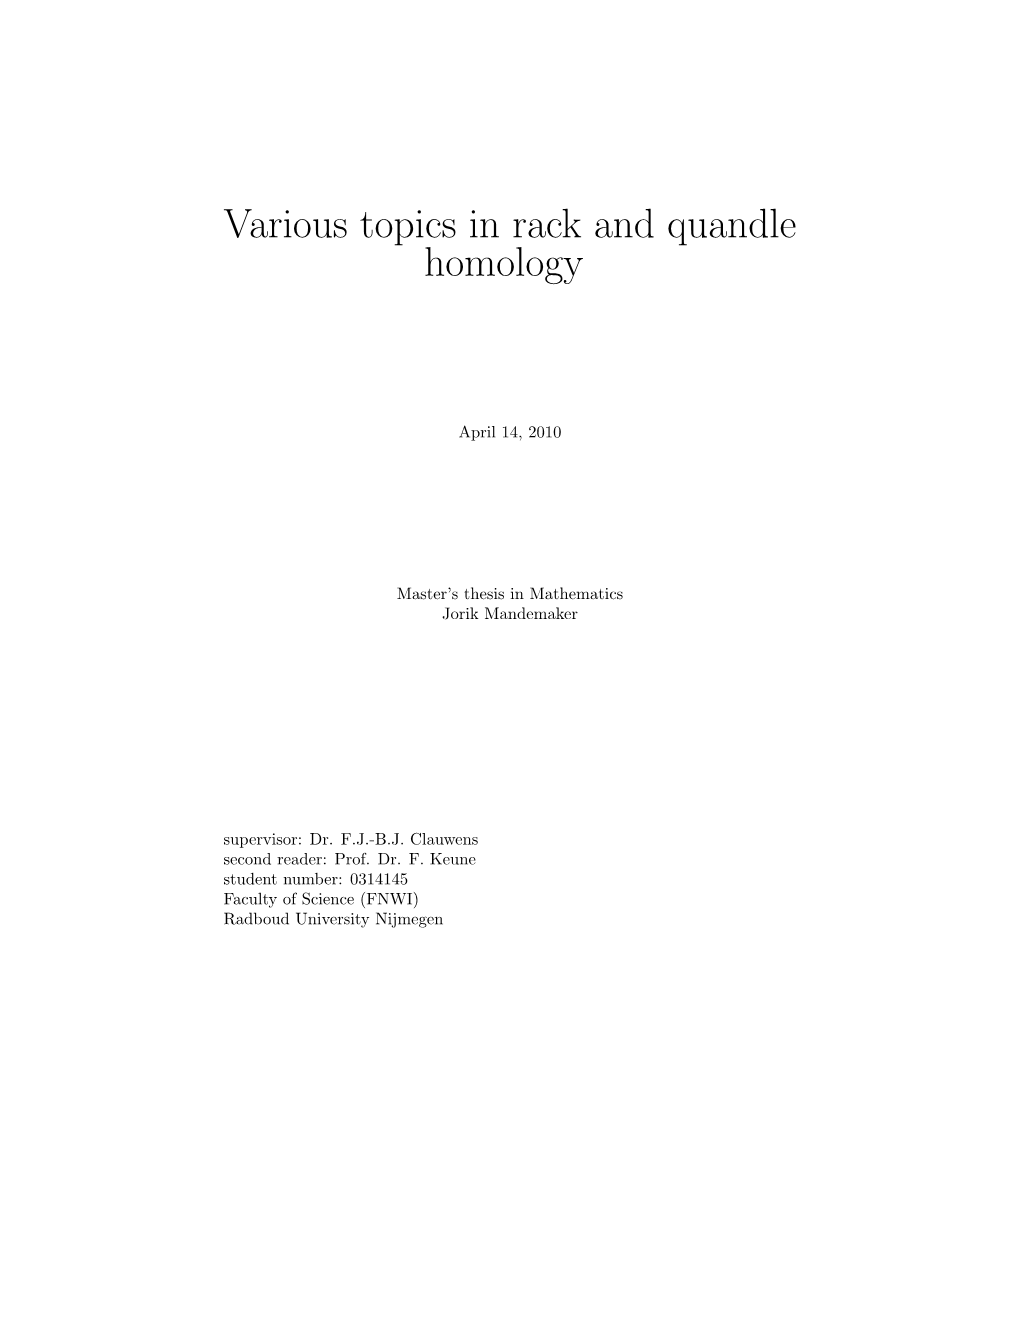 Various Topics in Rack and Quandle Homology